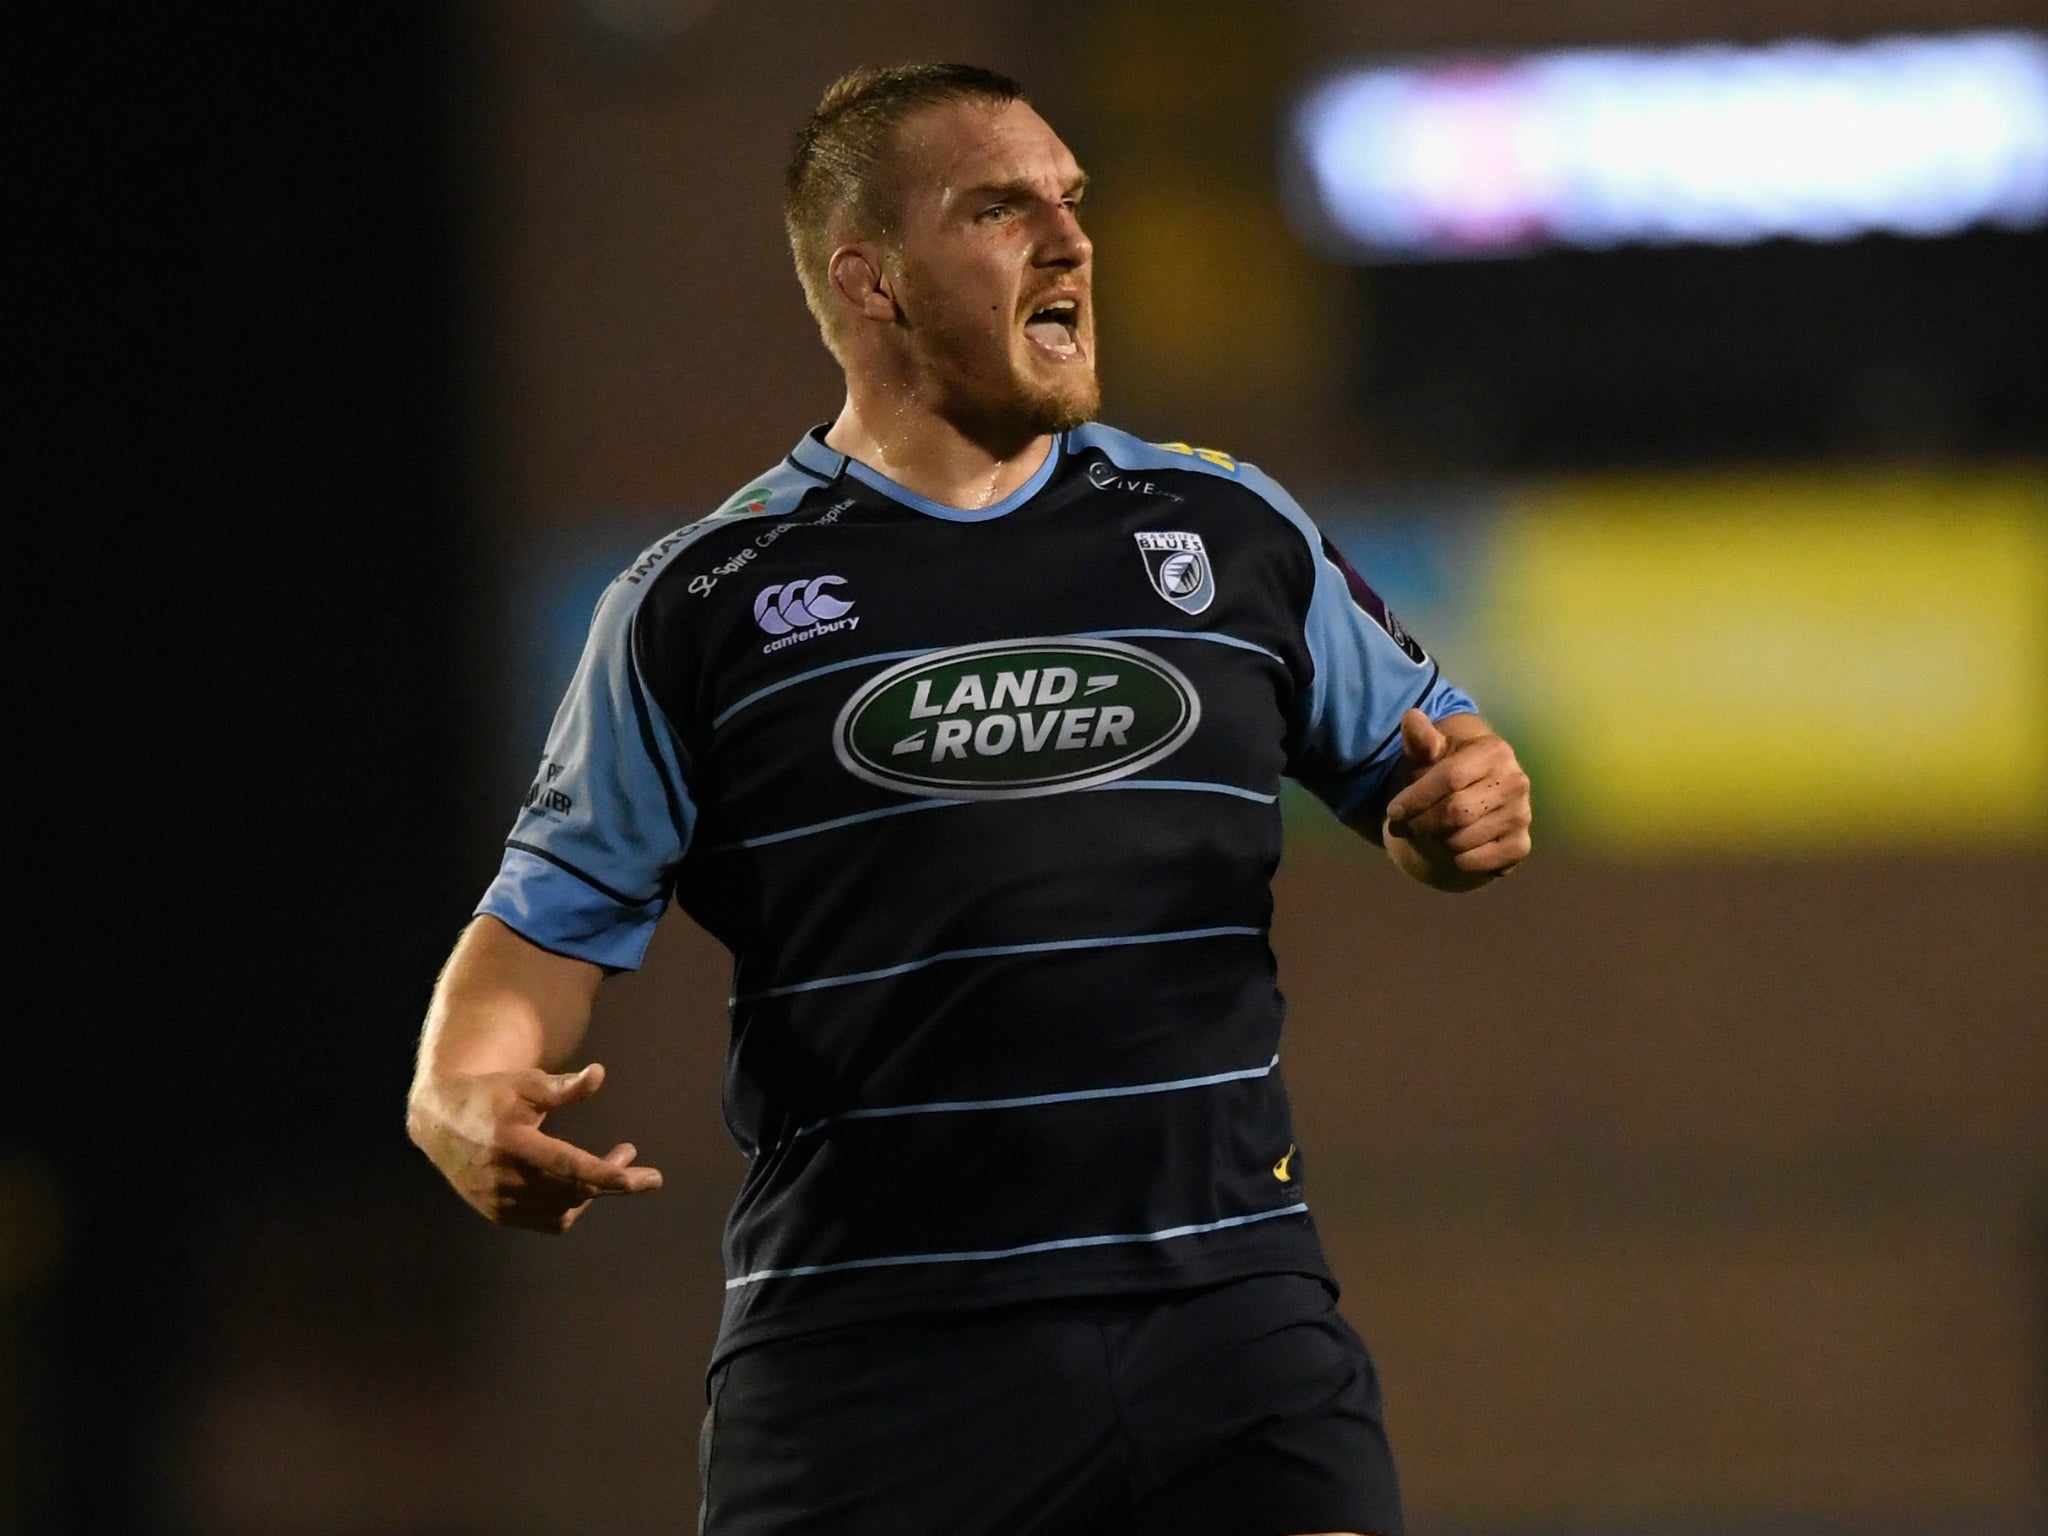 Gethin Jenkins will miss the European Challenge Cup final with a calf injury